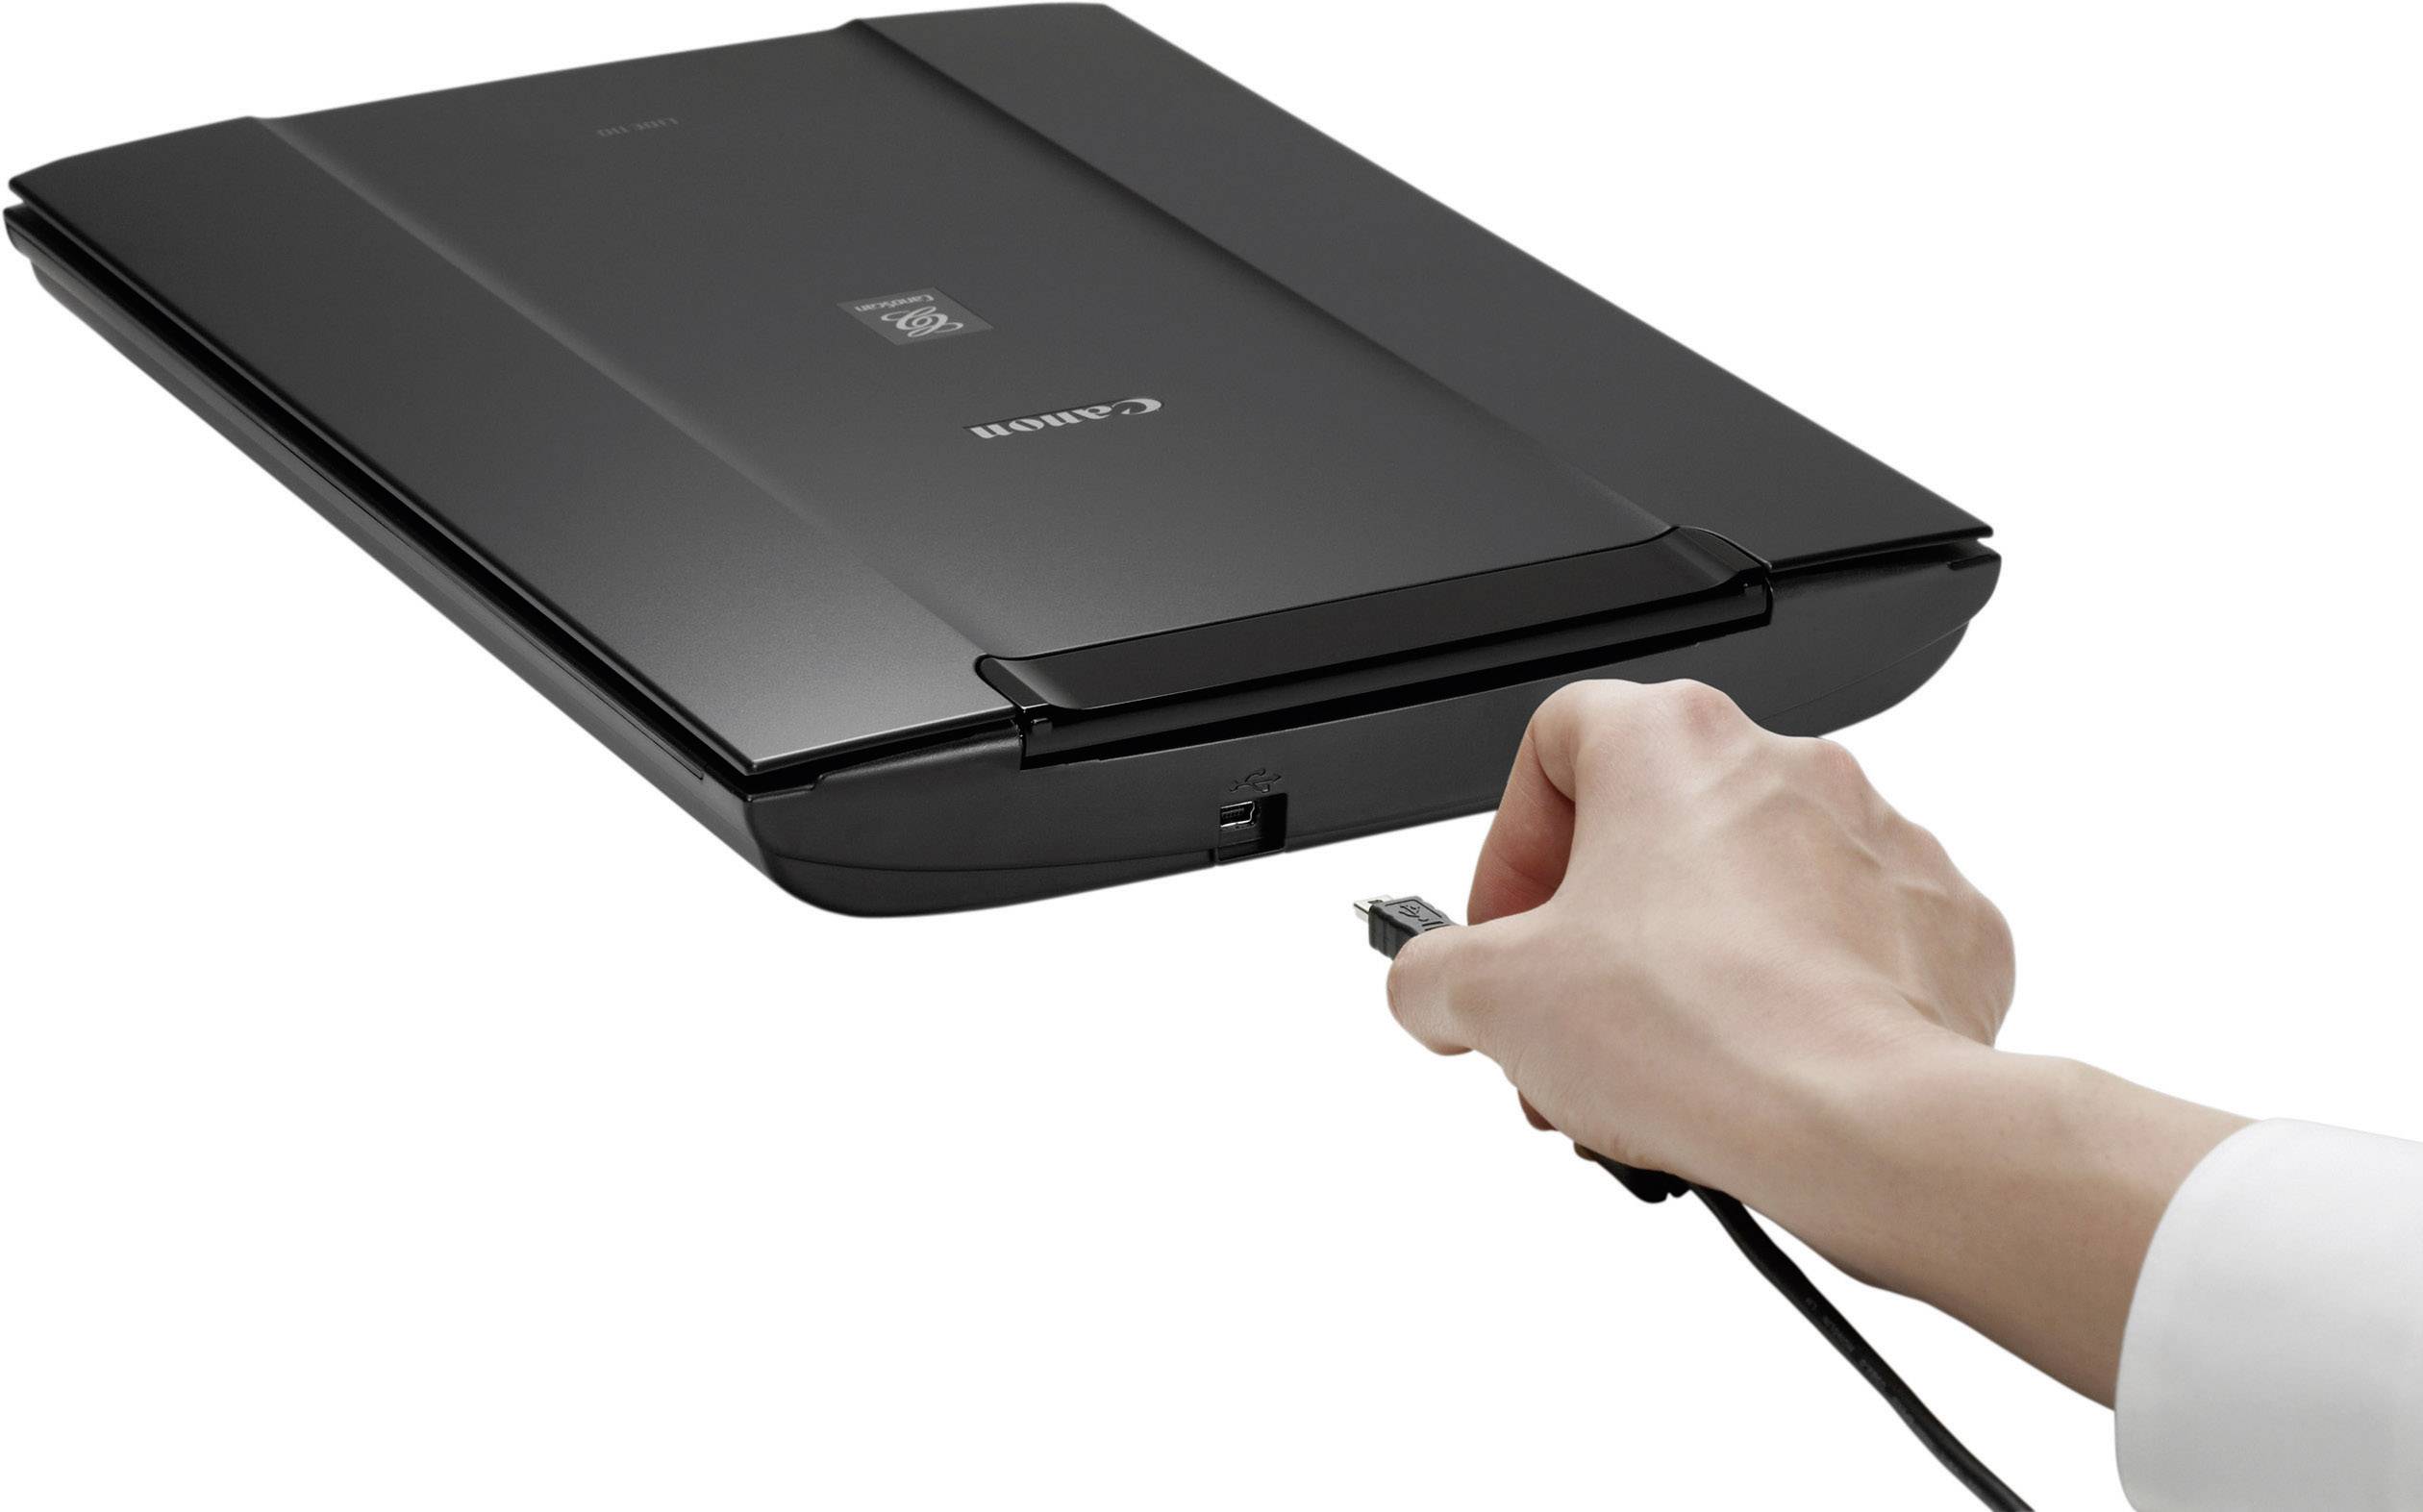 canon lide 110 scanner price in india